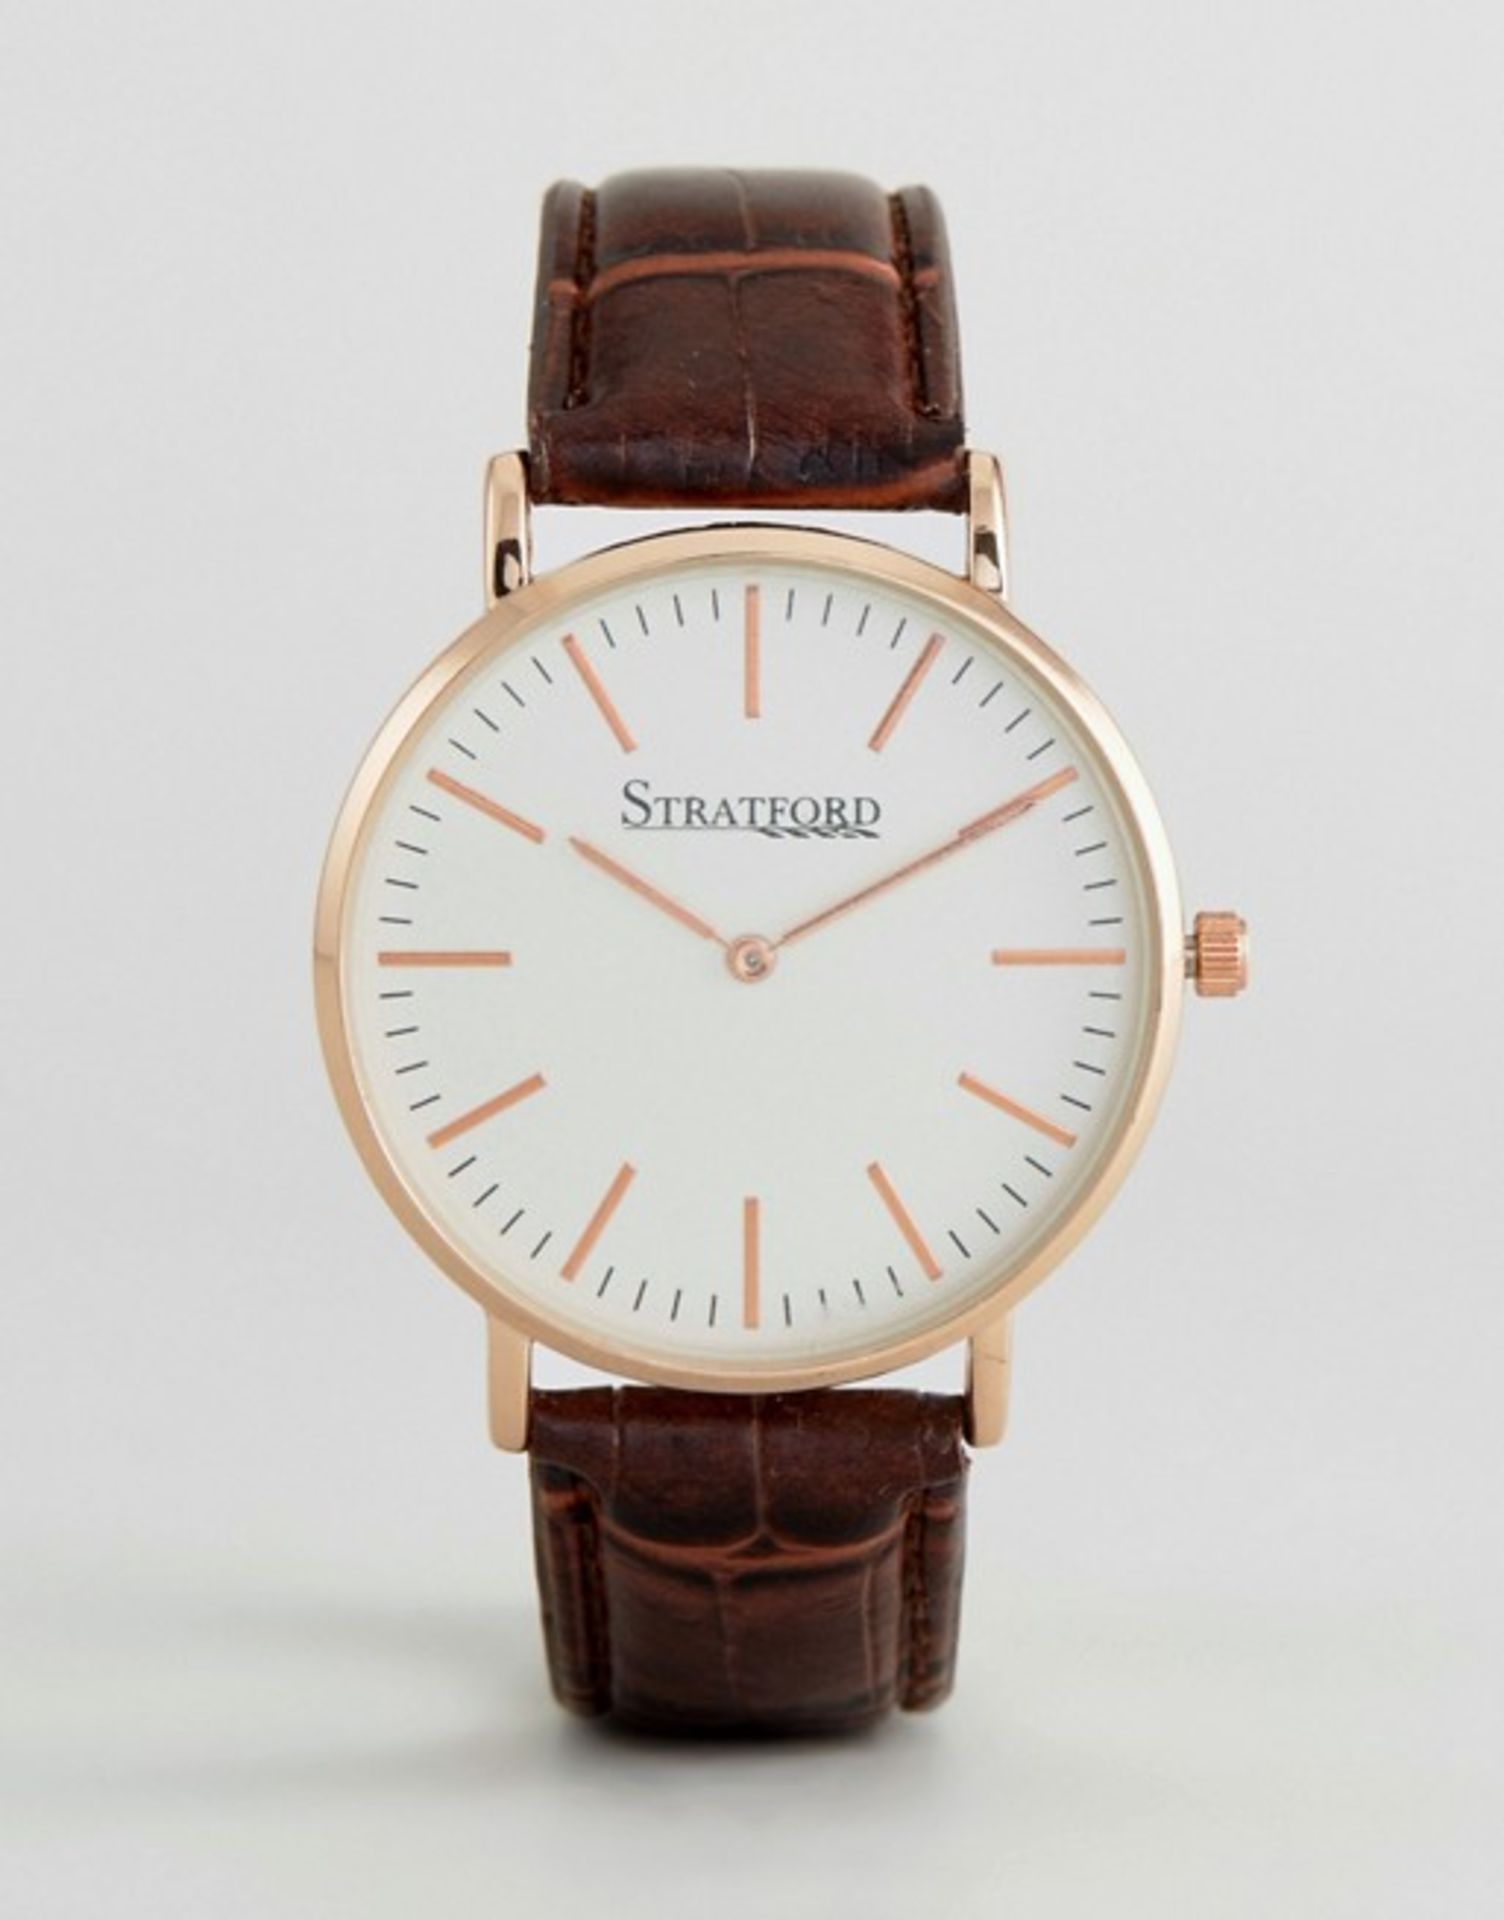 V Brand New Stratford Large White Faced Watch With Brown Strap